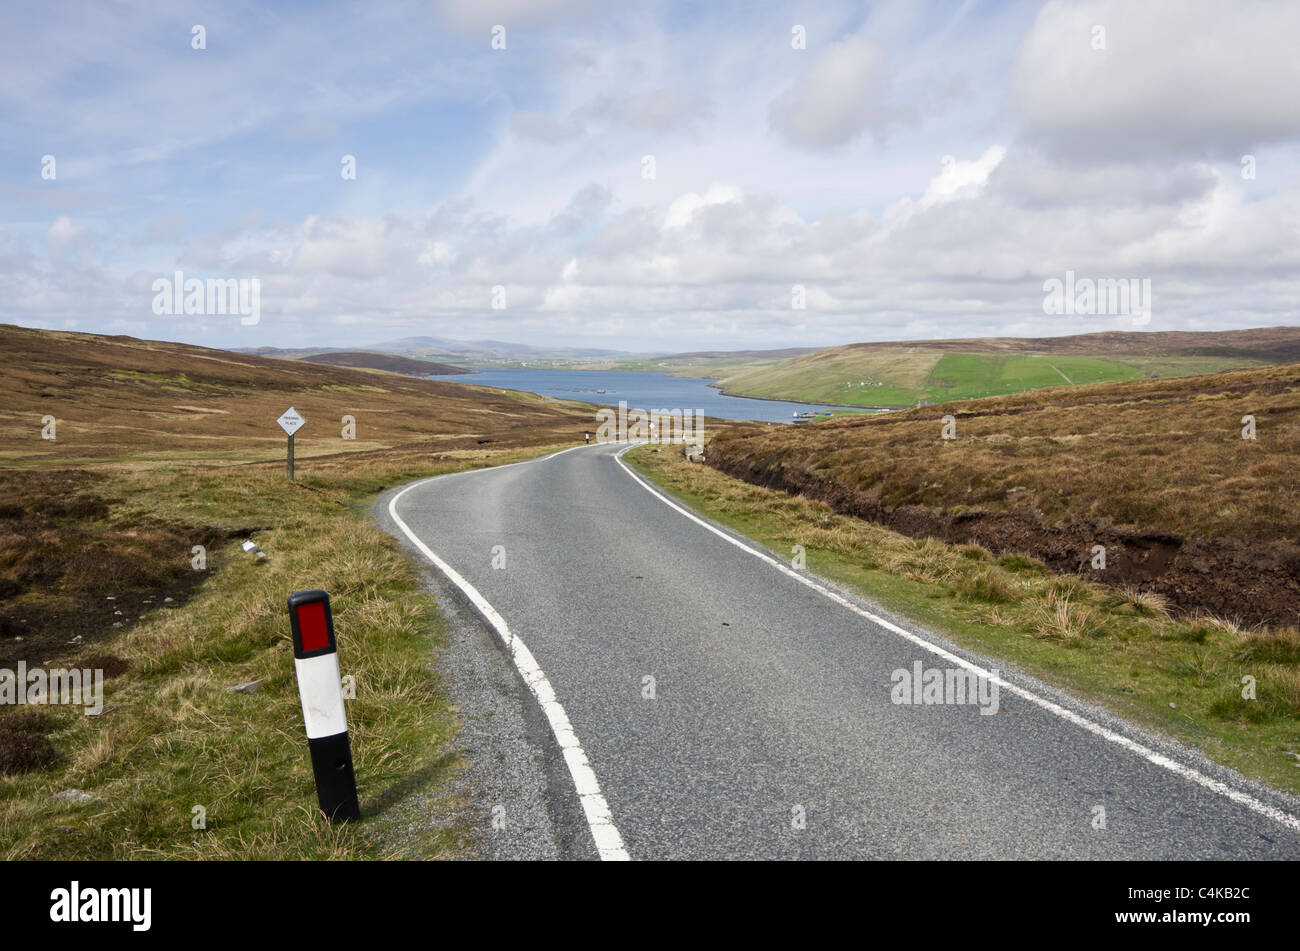 Single track rural country road with passing places. Voe, Shetland Islands, Scotland, UK, Britain. Stock Photo